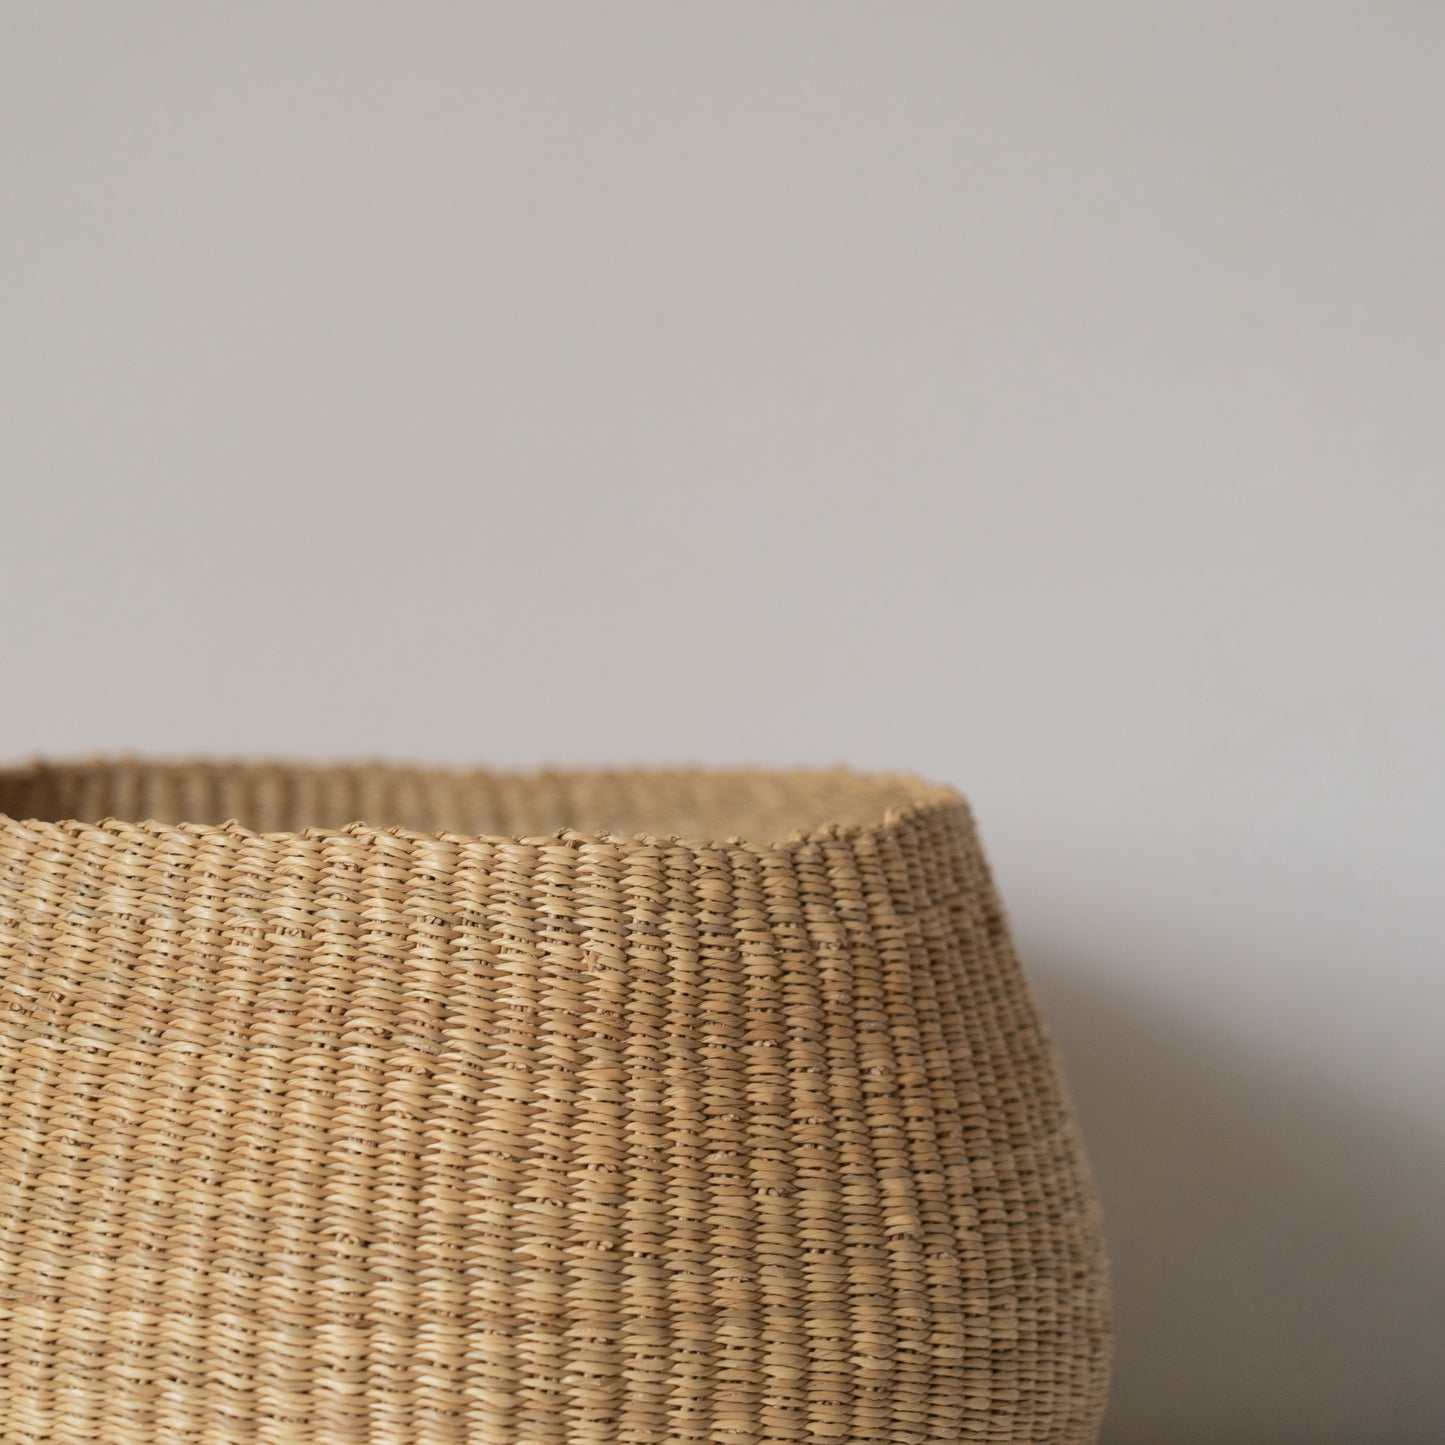 hand crafted basket made from grass